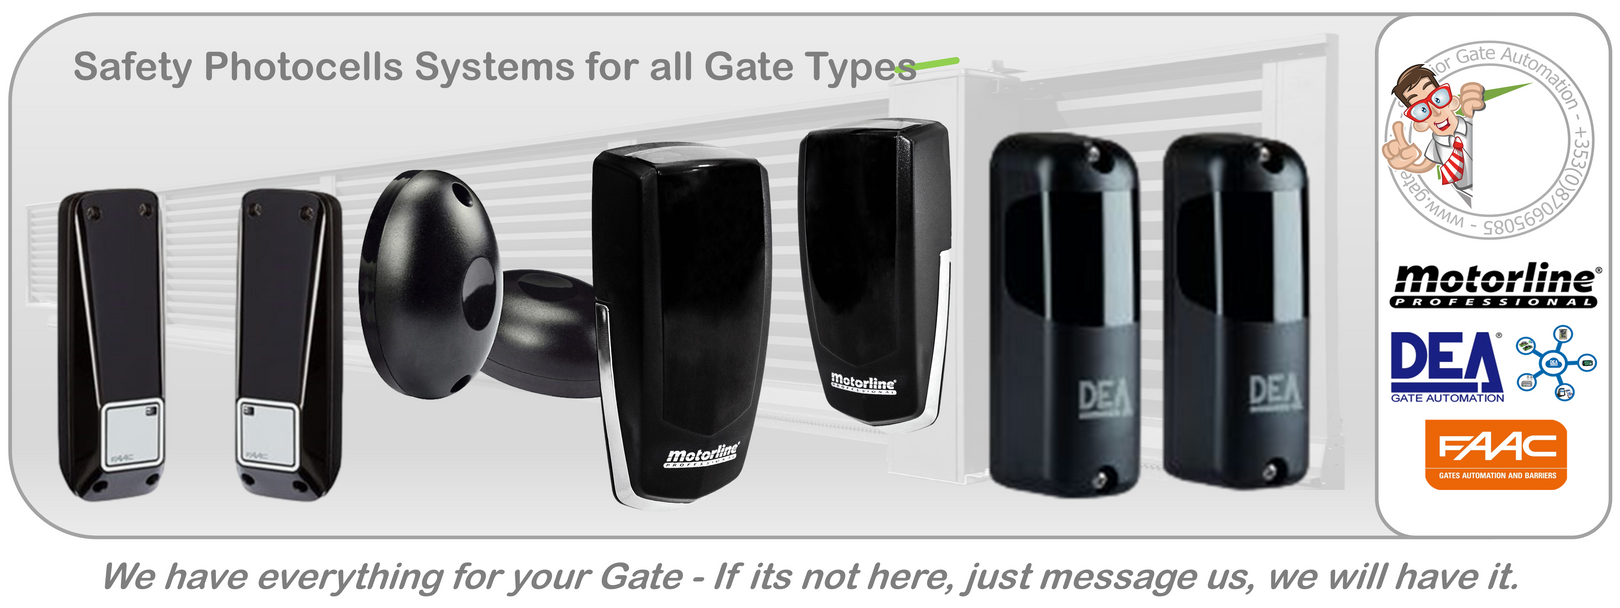 Safety Photocells Systems for all Gate Type